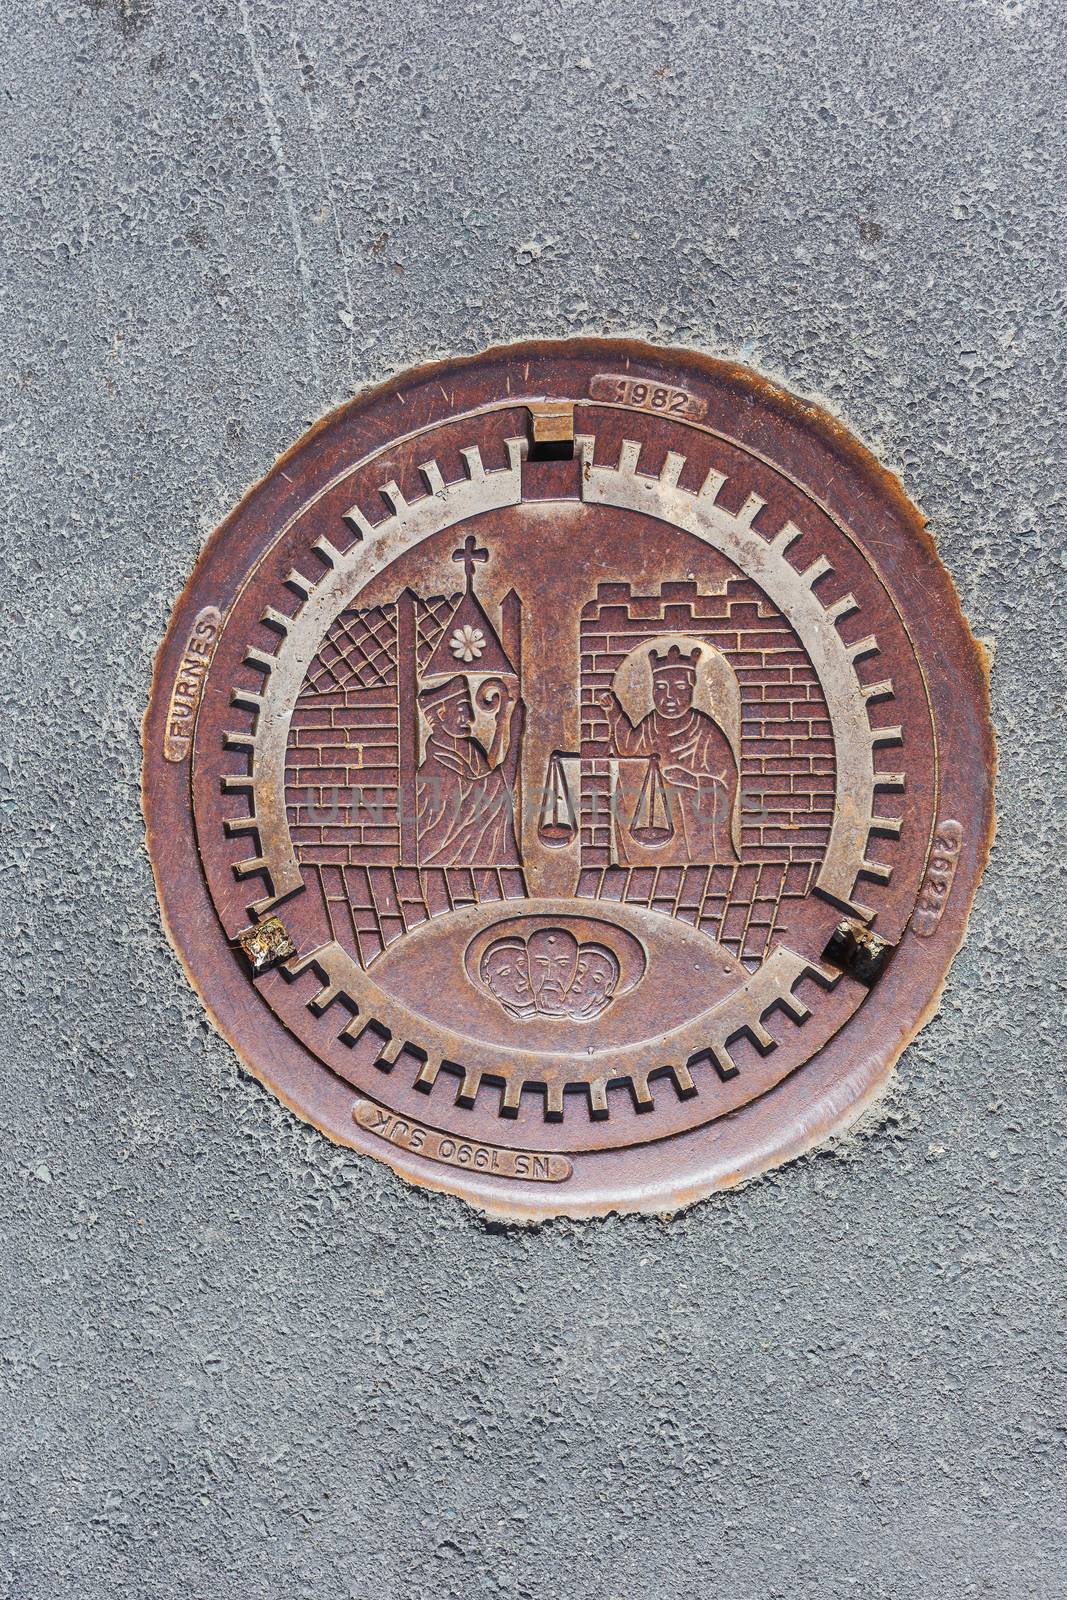 Metal sewerage hatchway with bas relief. Iron manhole with historic scene. Trondheim, Norway.